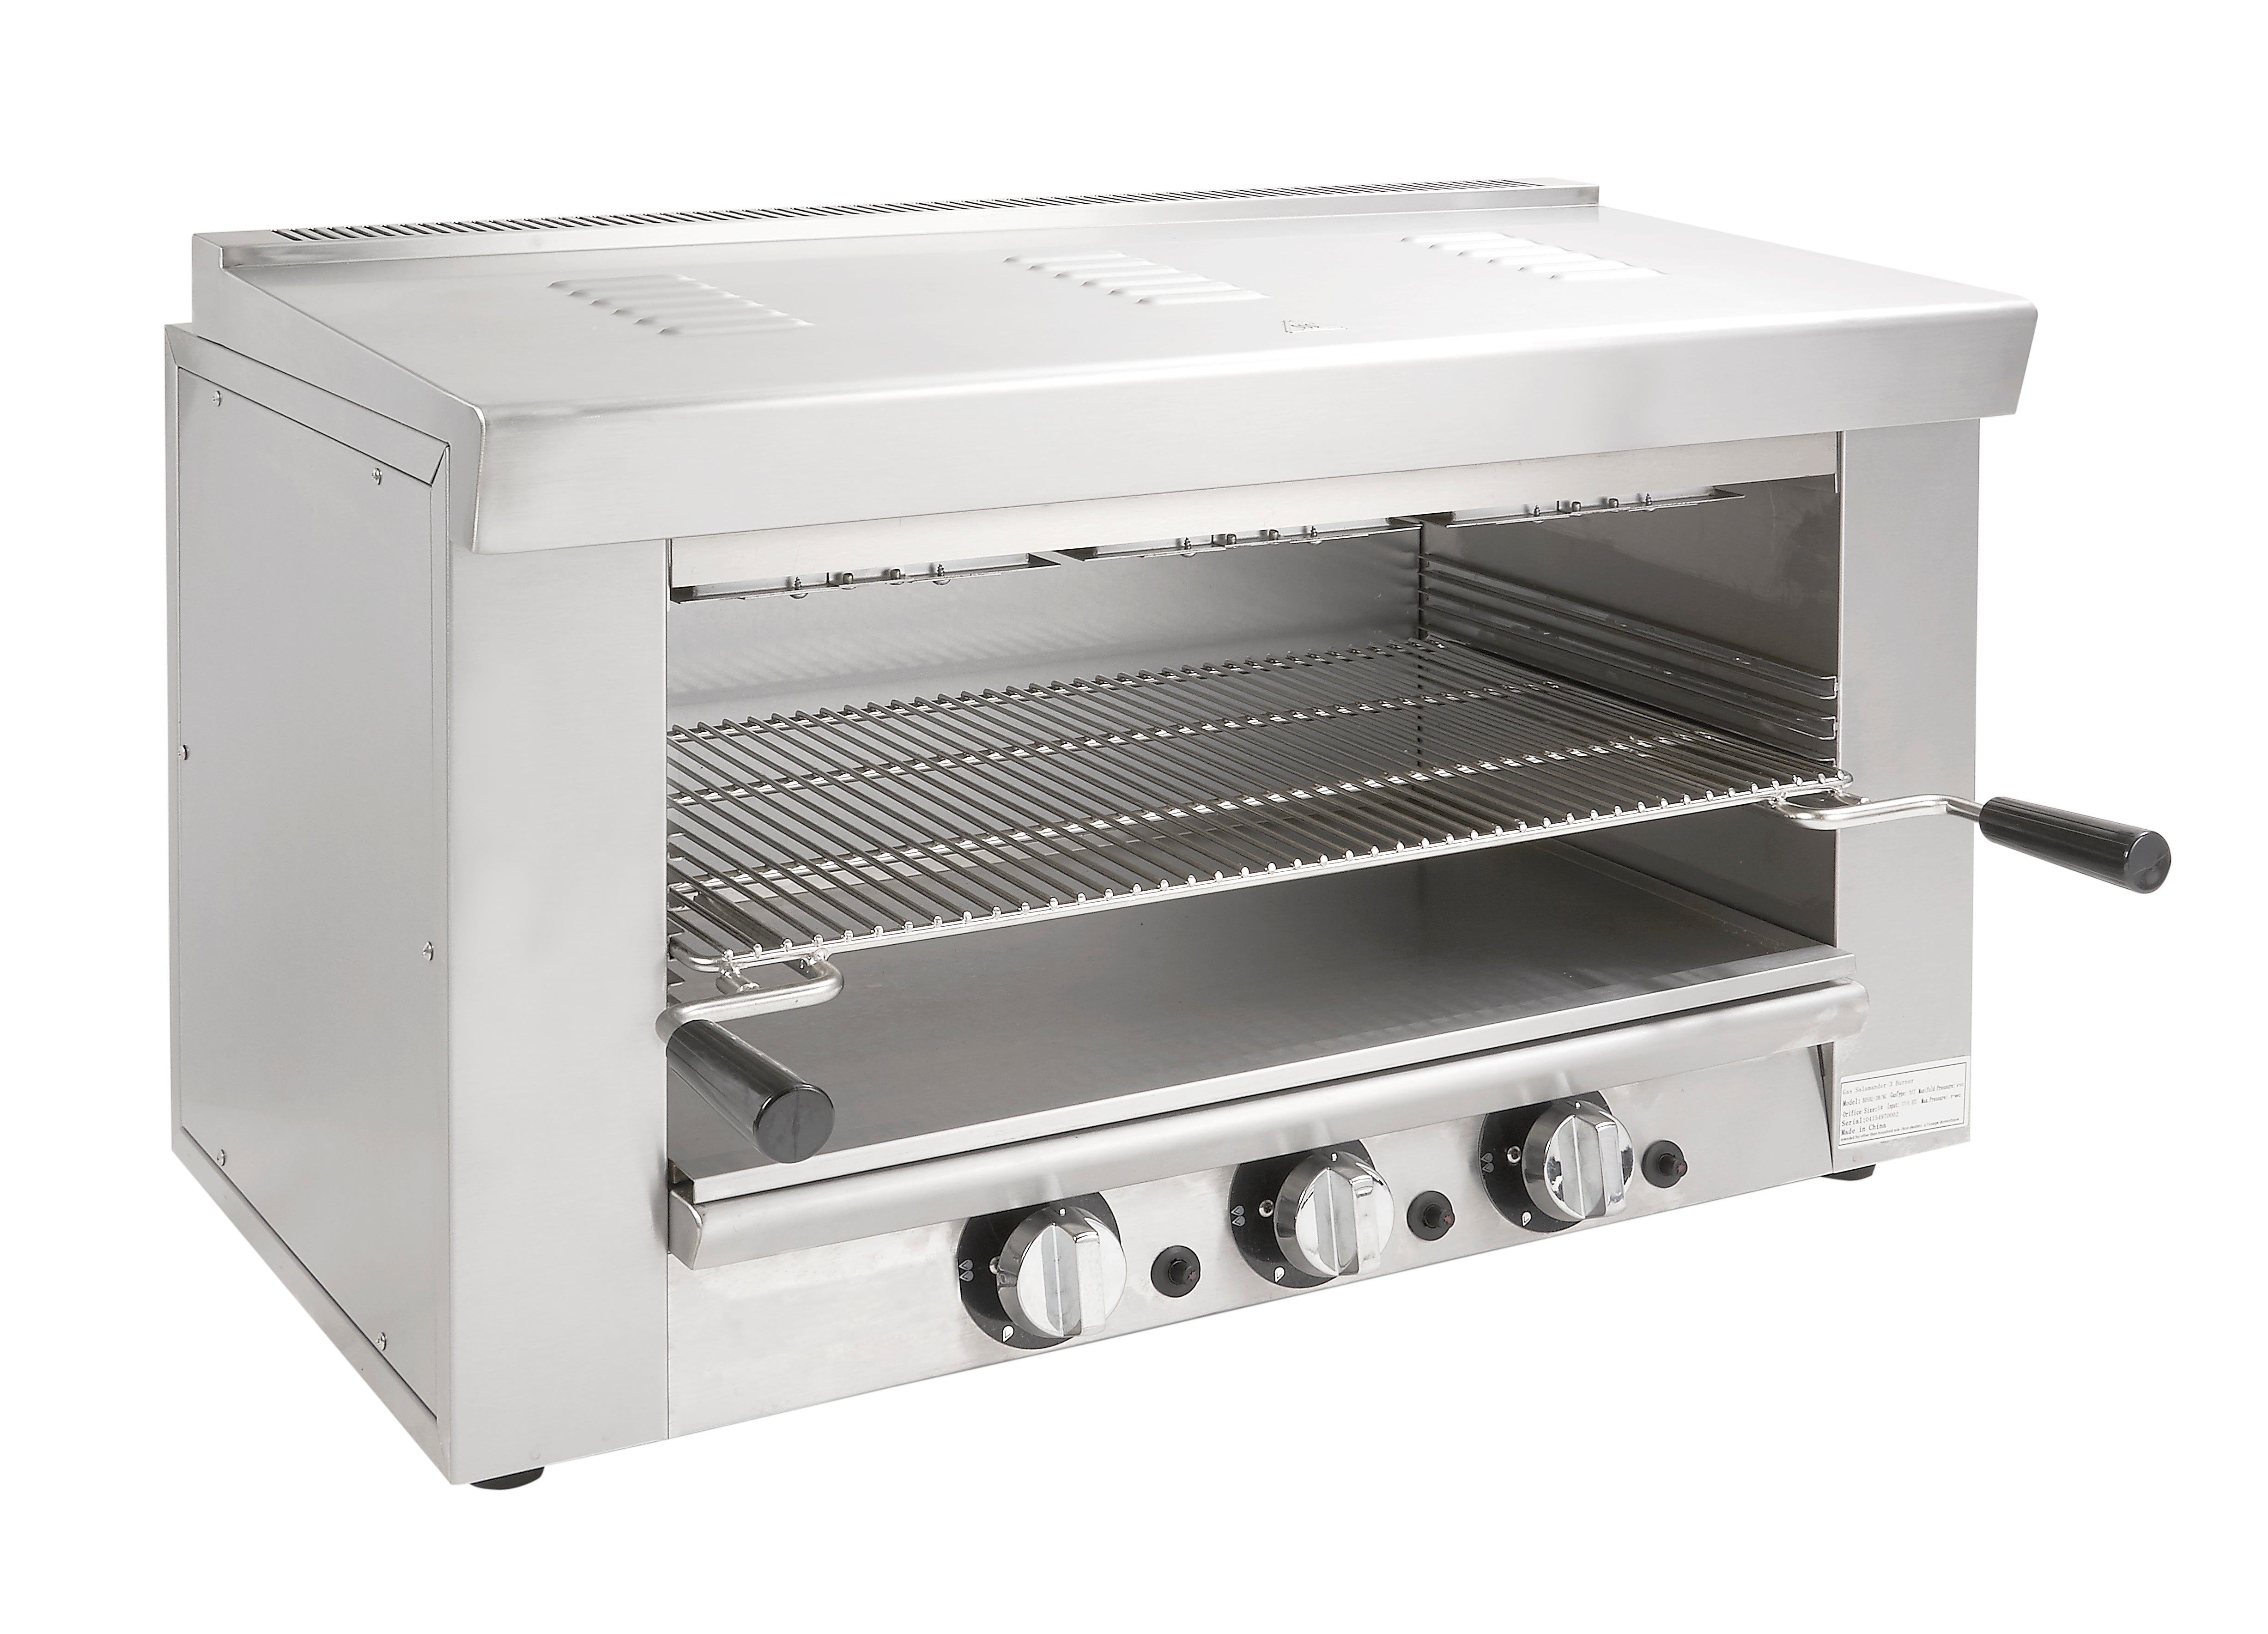 Adcraft CHM-2400W Cheesemelter, Electric